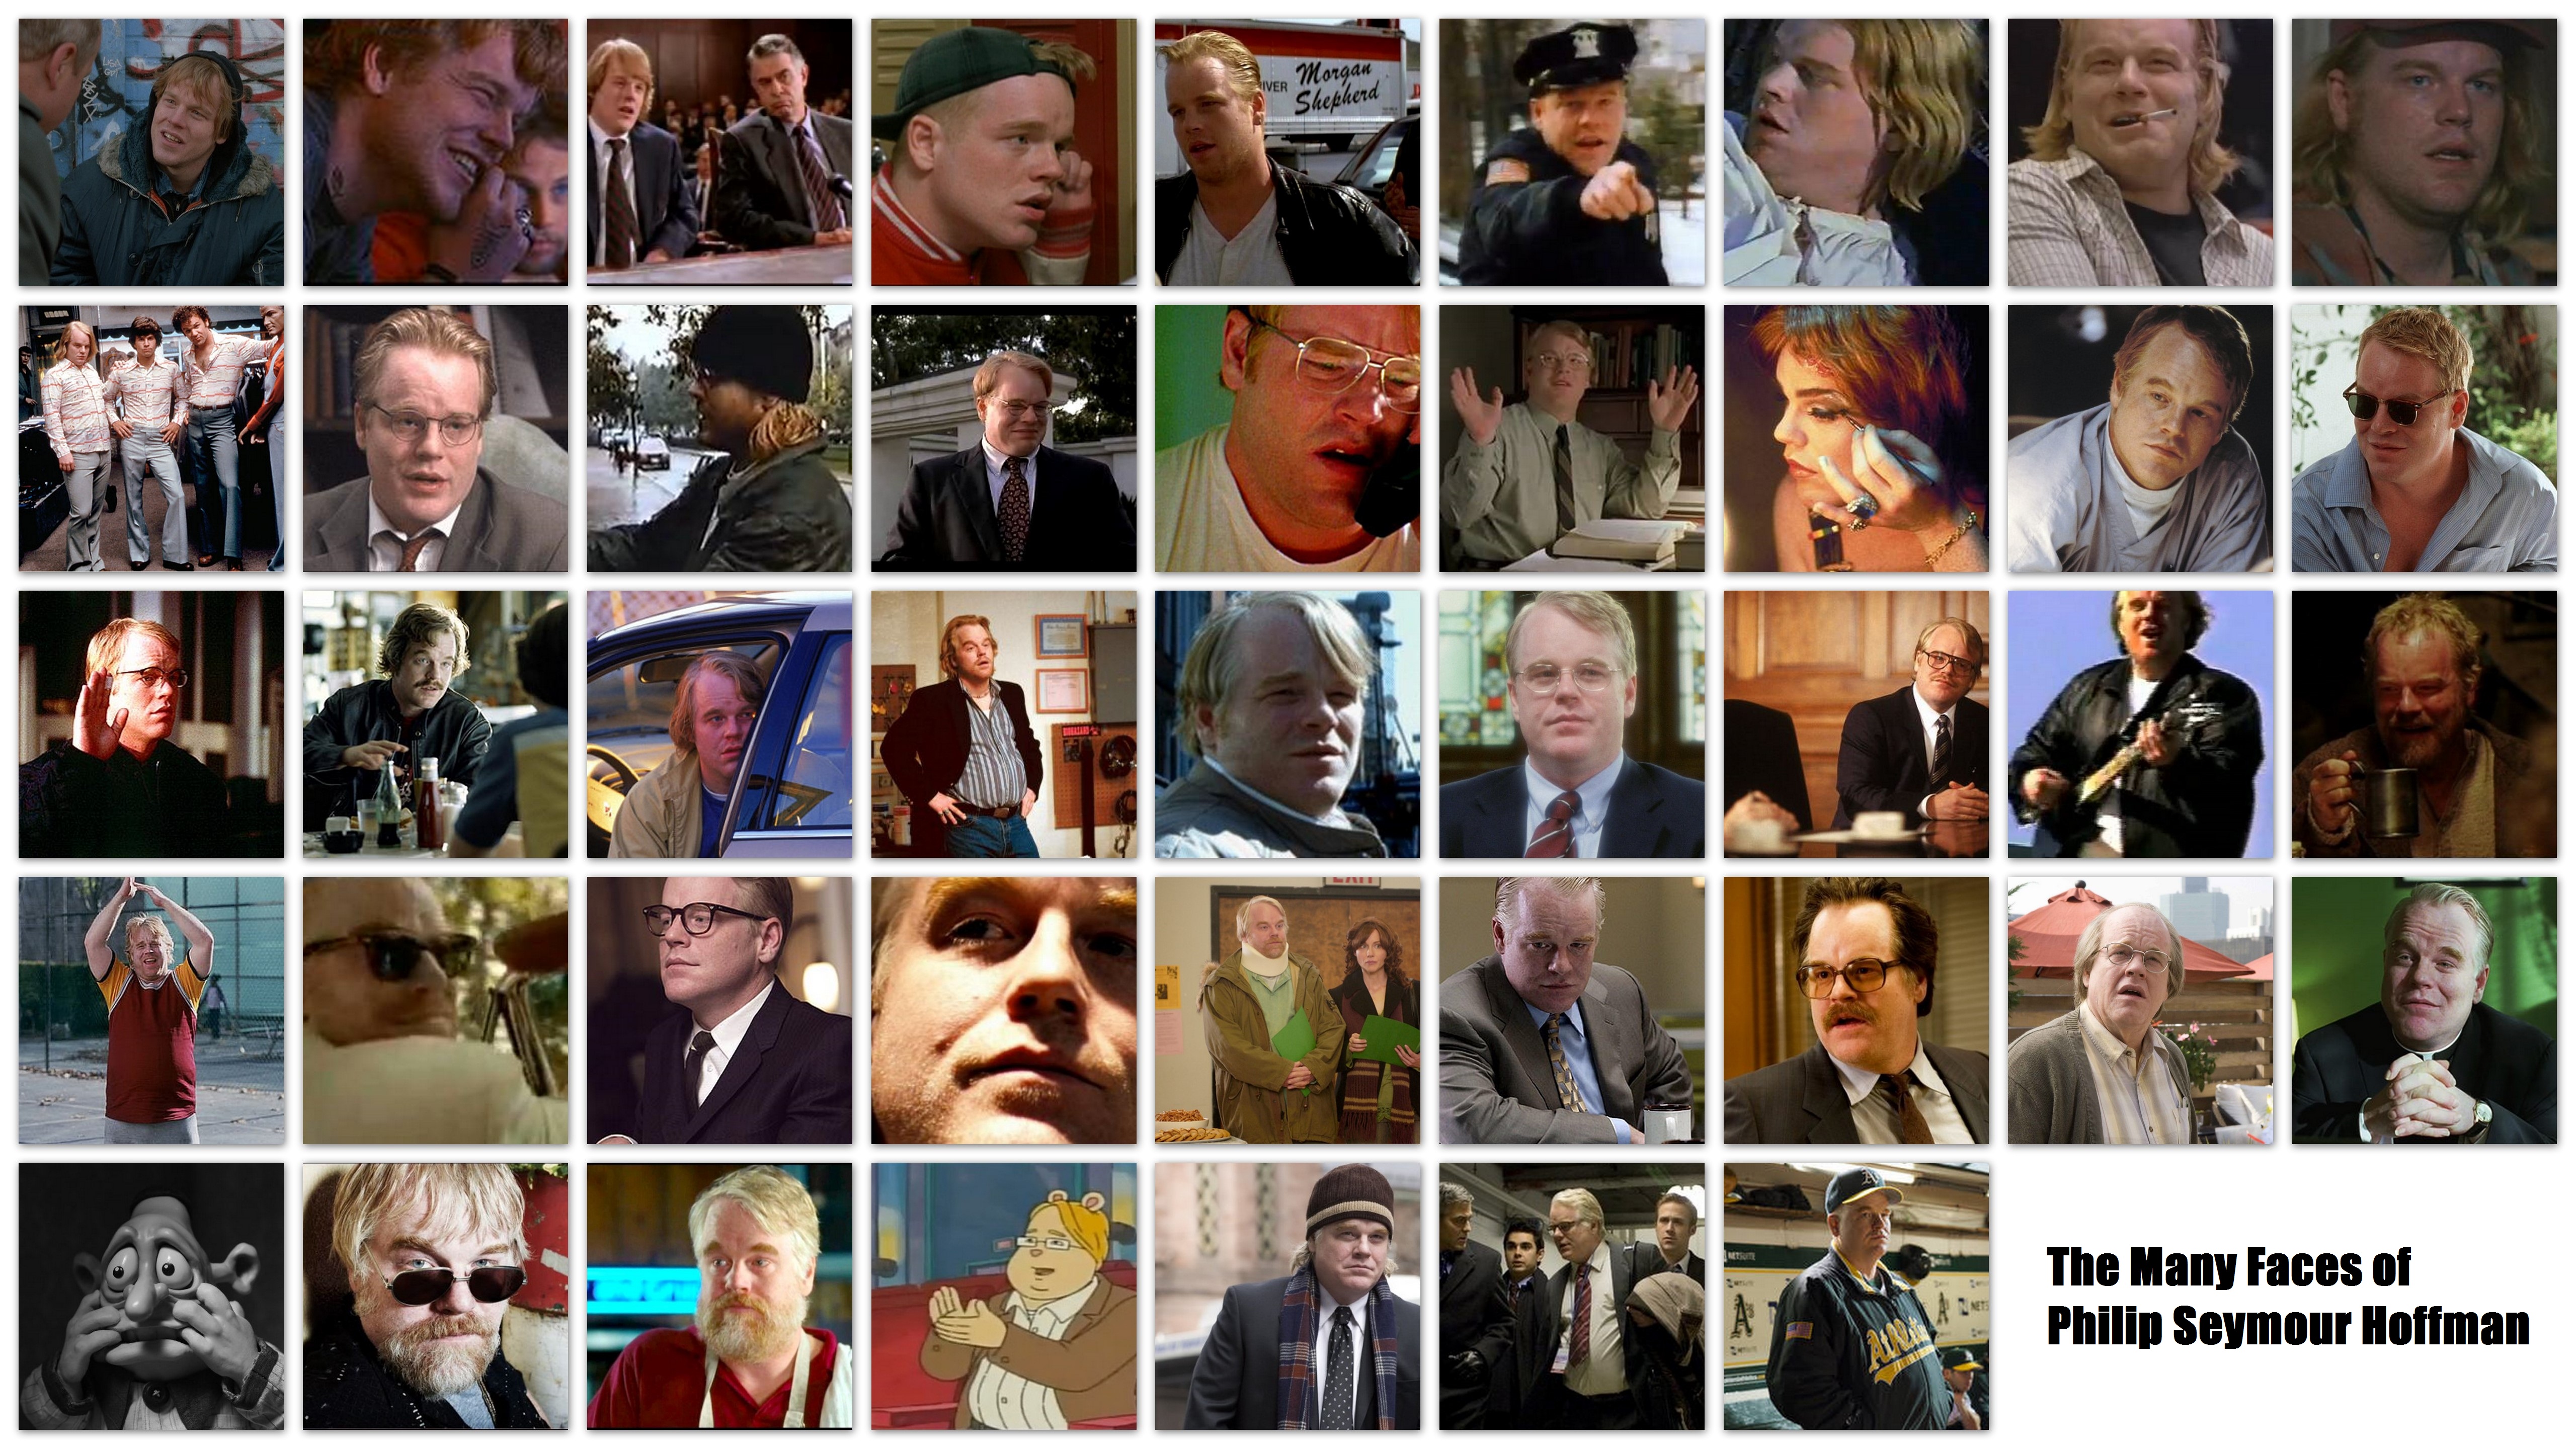 The Many Faces of... Philip Seymour Hoffman